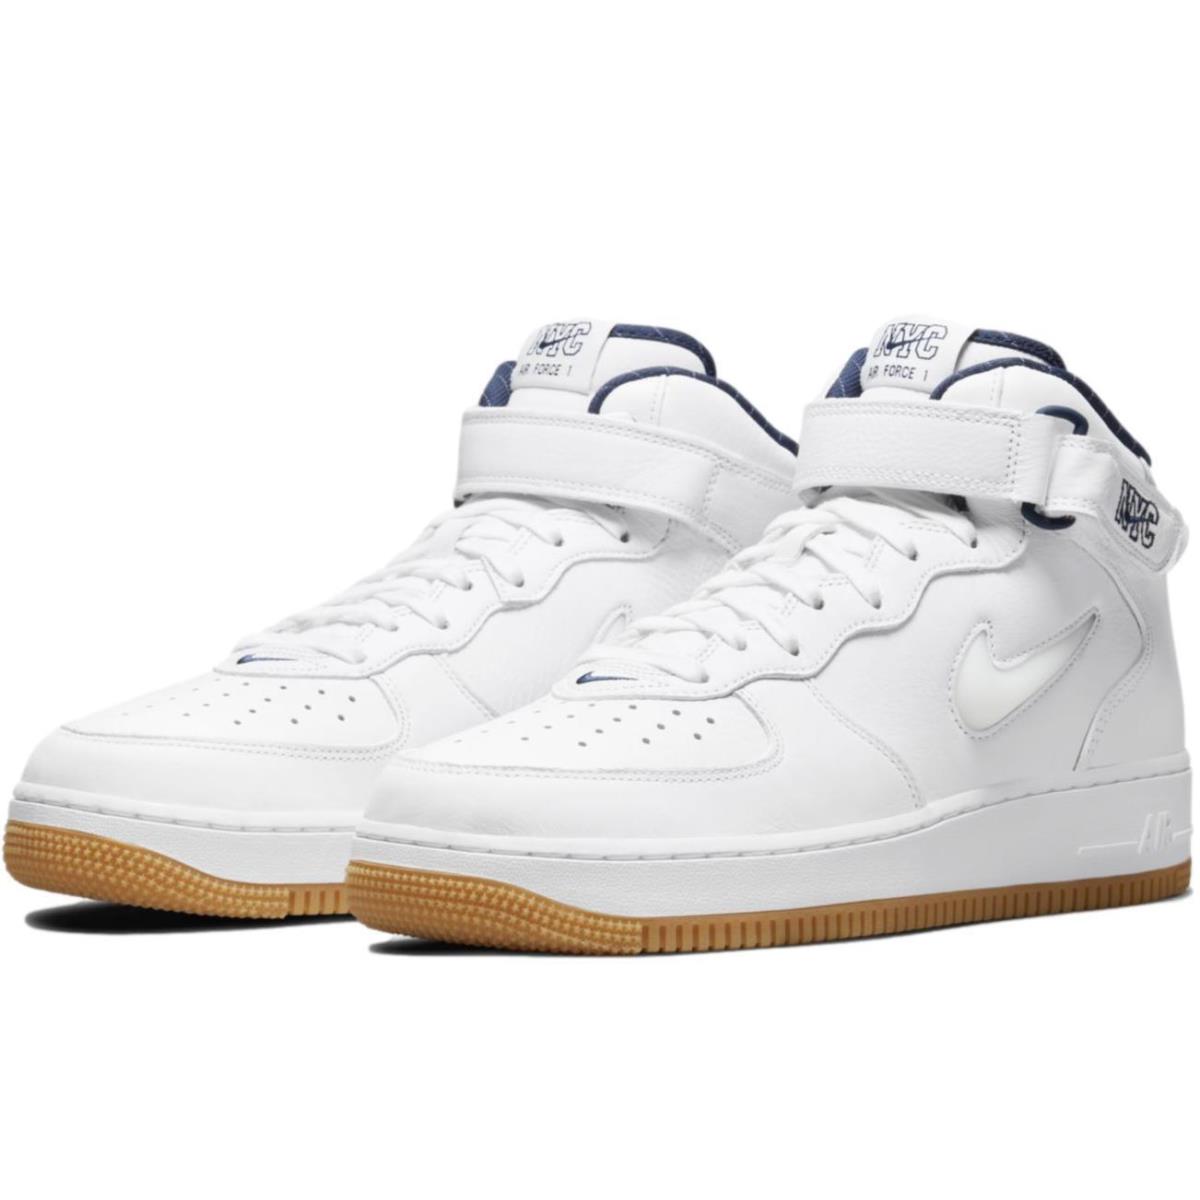 Nike Men`s Air Force 1 Mid Jewel QS `nyc - Yankees` Shoes DH5622-100 - White/White-Midnight Navy